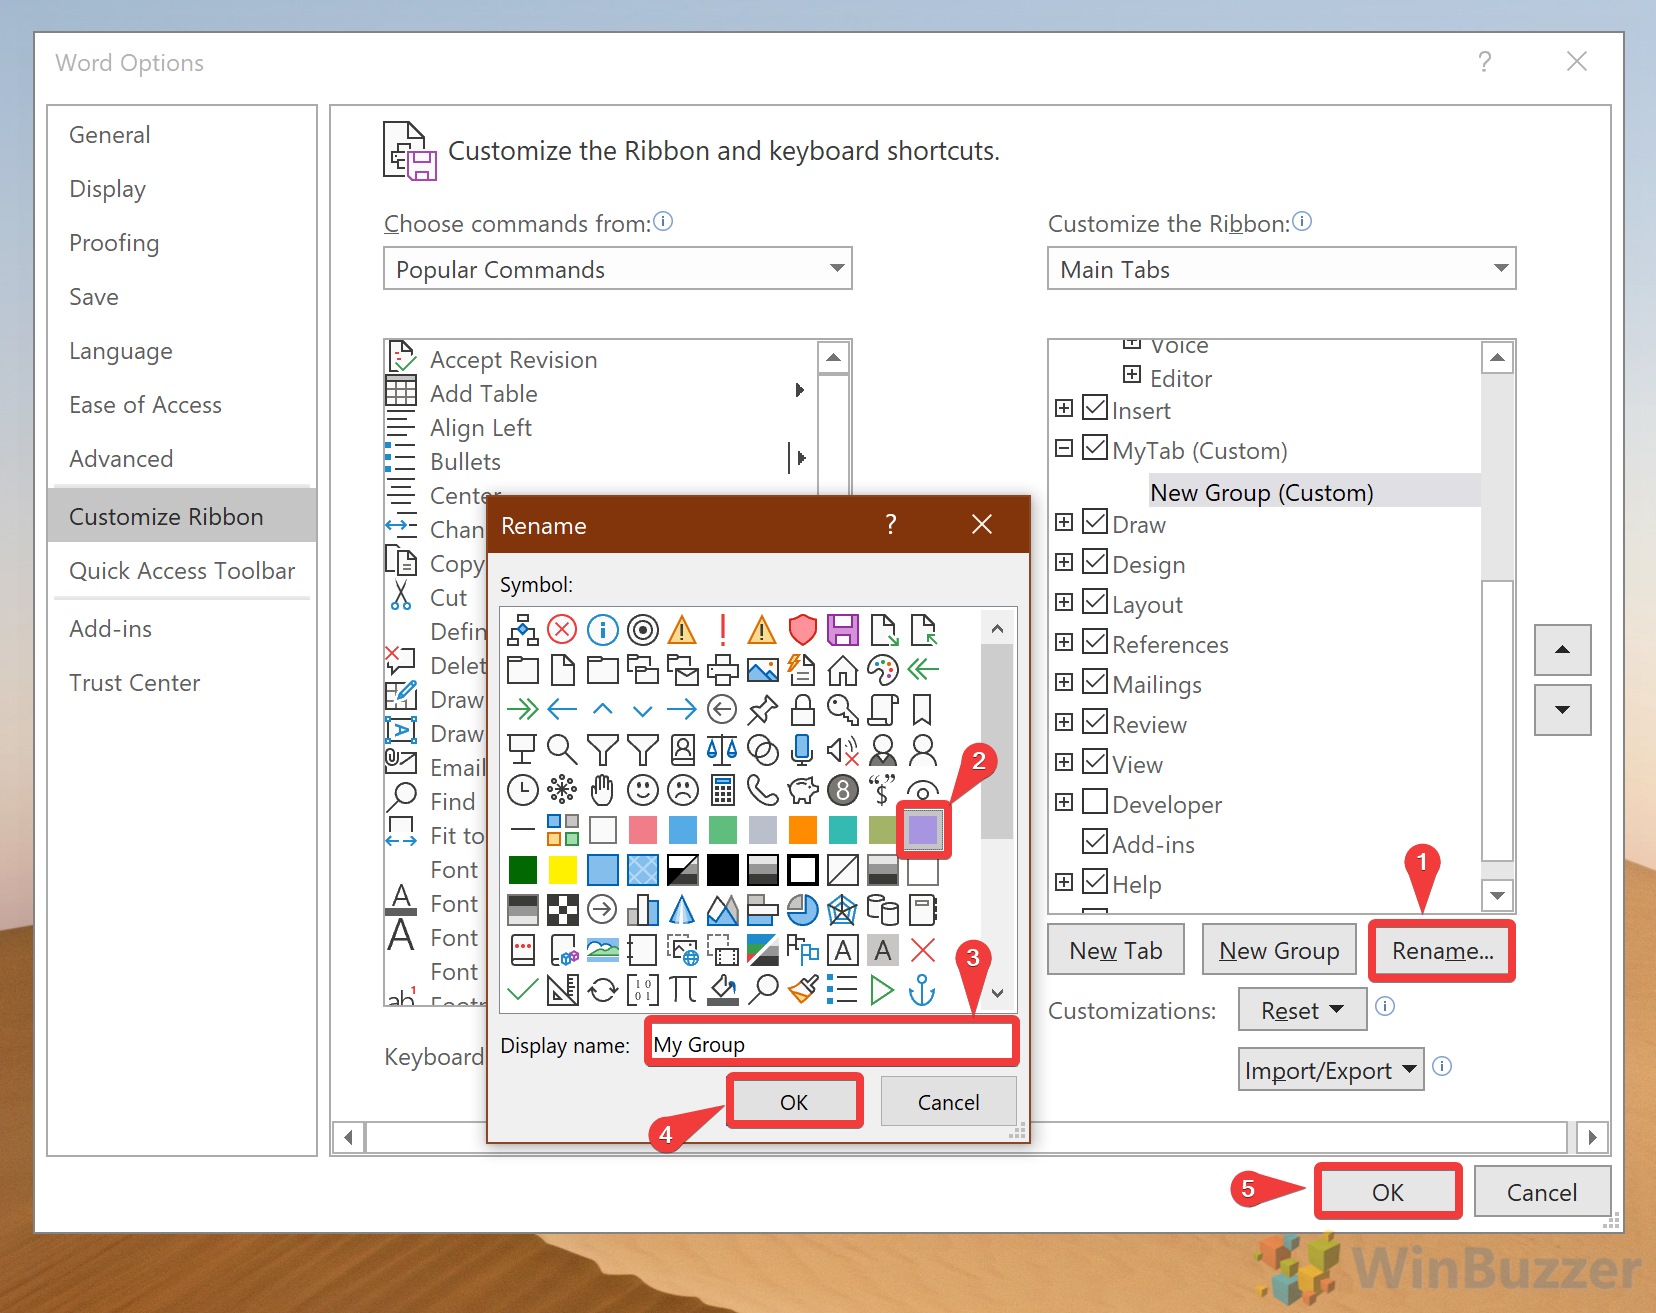 How to Customize the Ribbon in Microsoft Word  and other Office apps  - 31